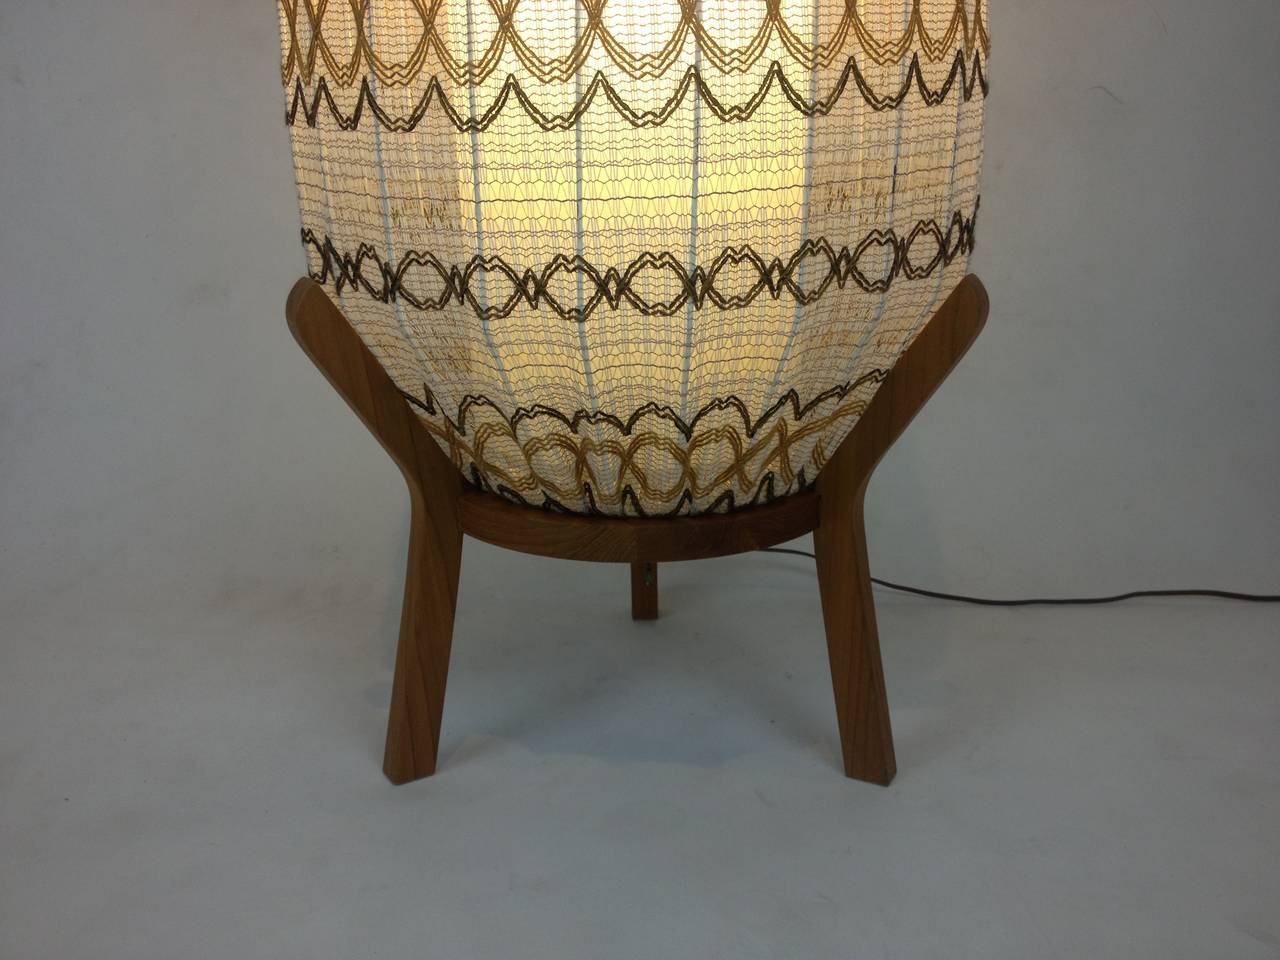 Unique 1960's Pod floor lamp - teak base with fabric cover over a cylinder center this beauty gives off an incredible glow,  the lovely ambiant lighting would look amazing in a bedroom and/or living room - excellent condition